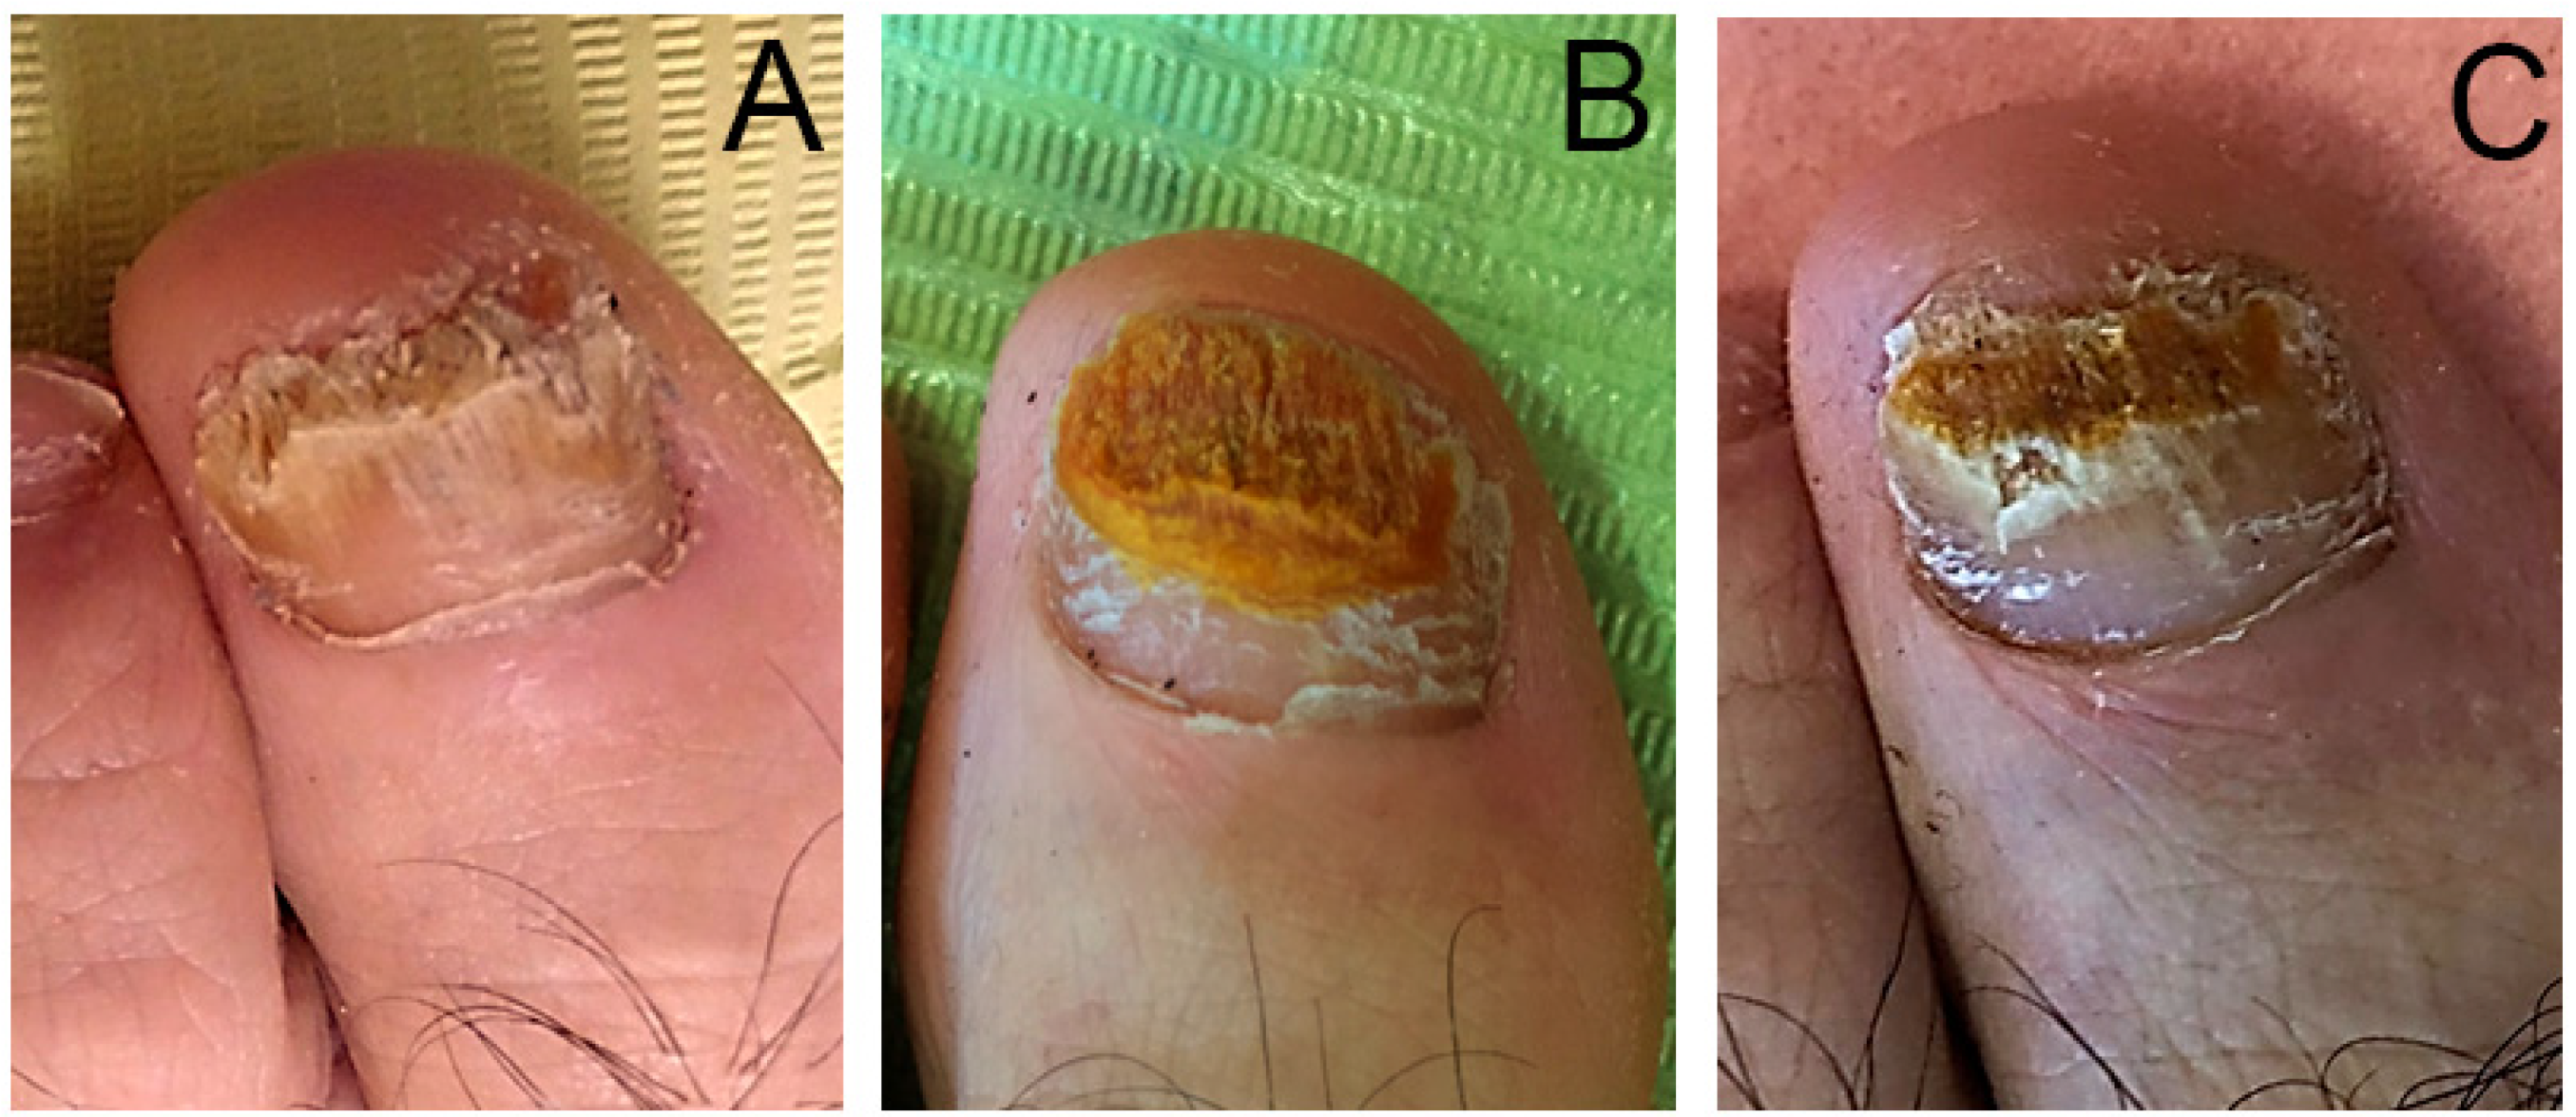 Management and treatment options for common foot conditions - The  Pharmaceutical Journal